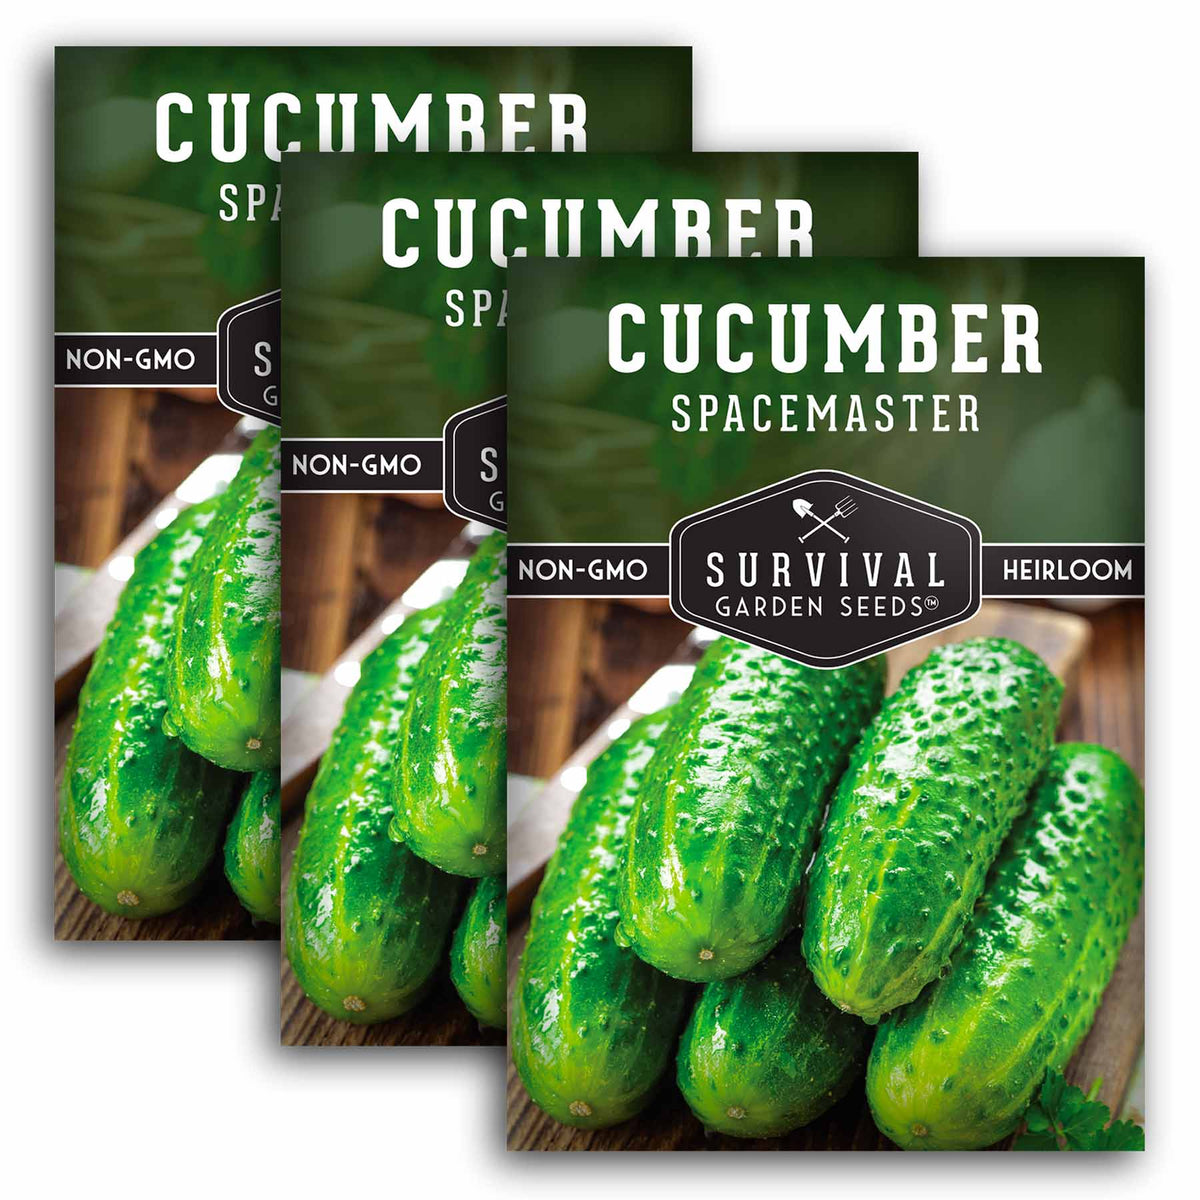 3 packets of Spacemaster Cucumber seeds